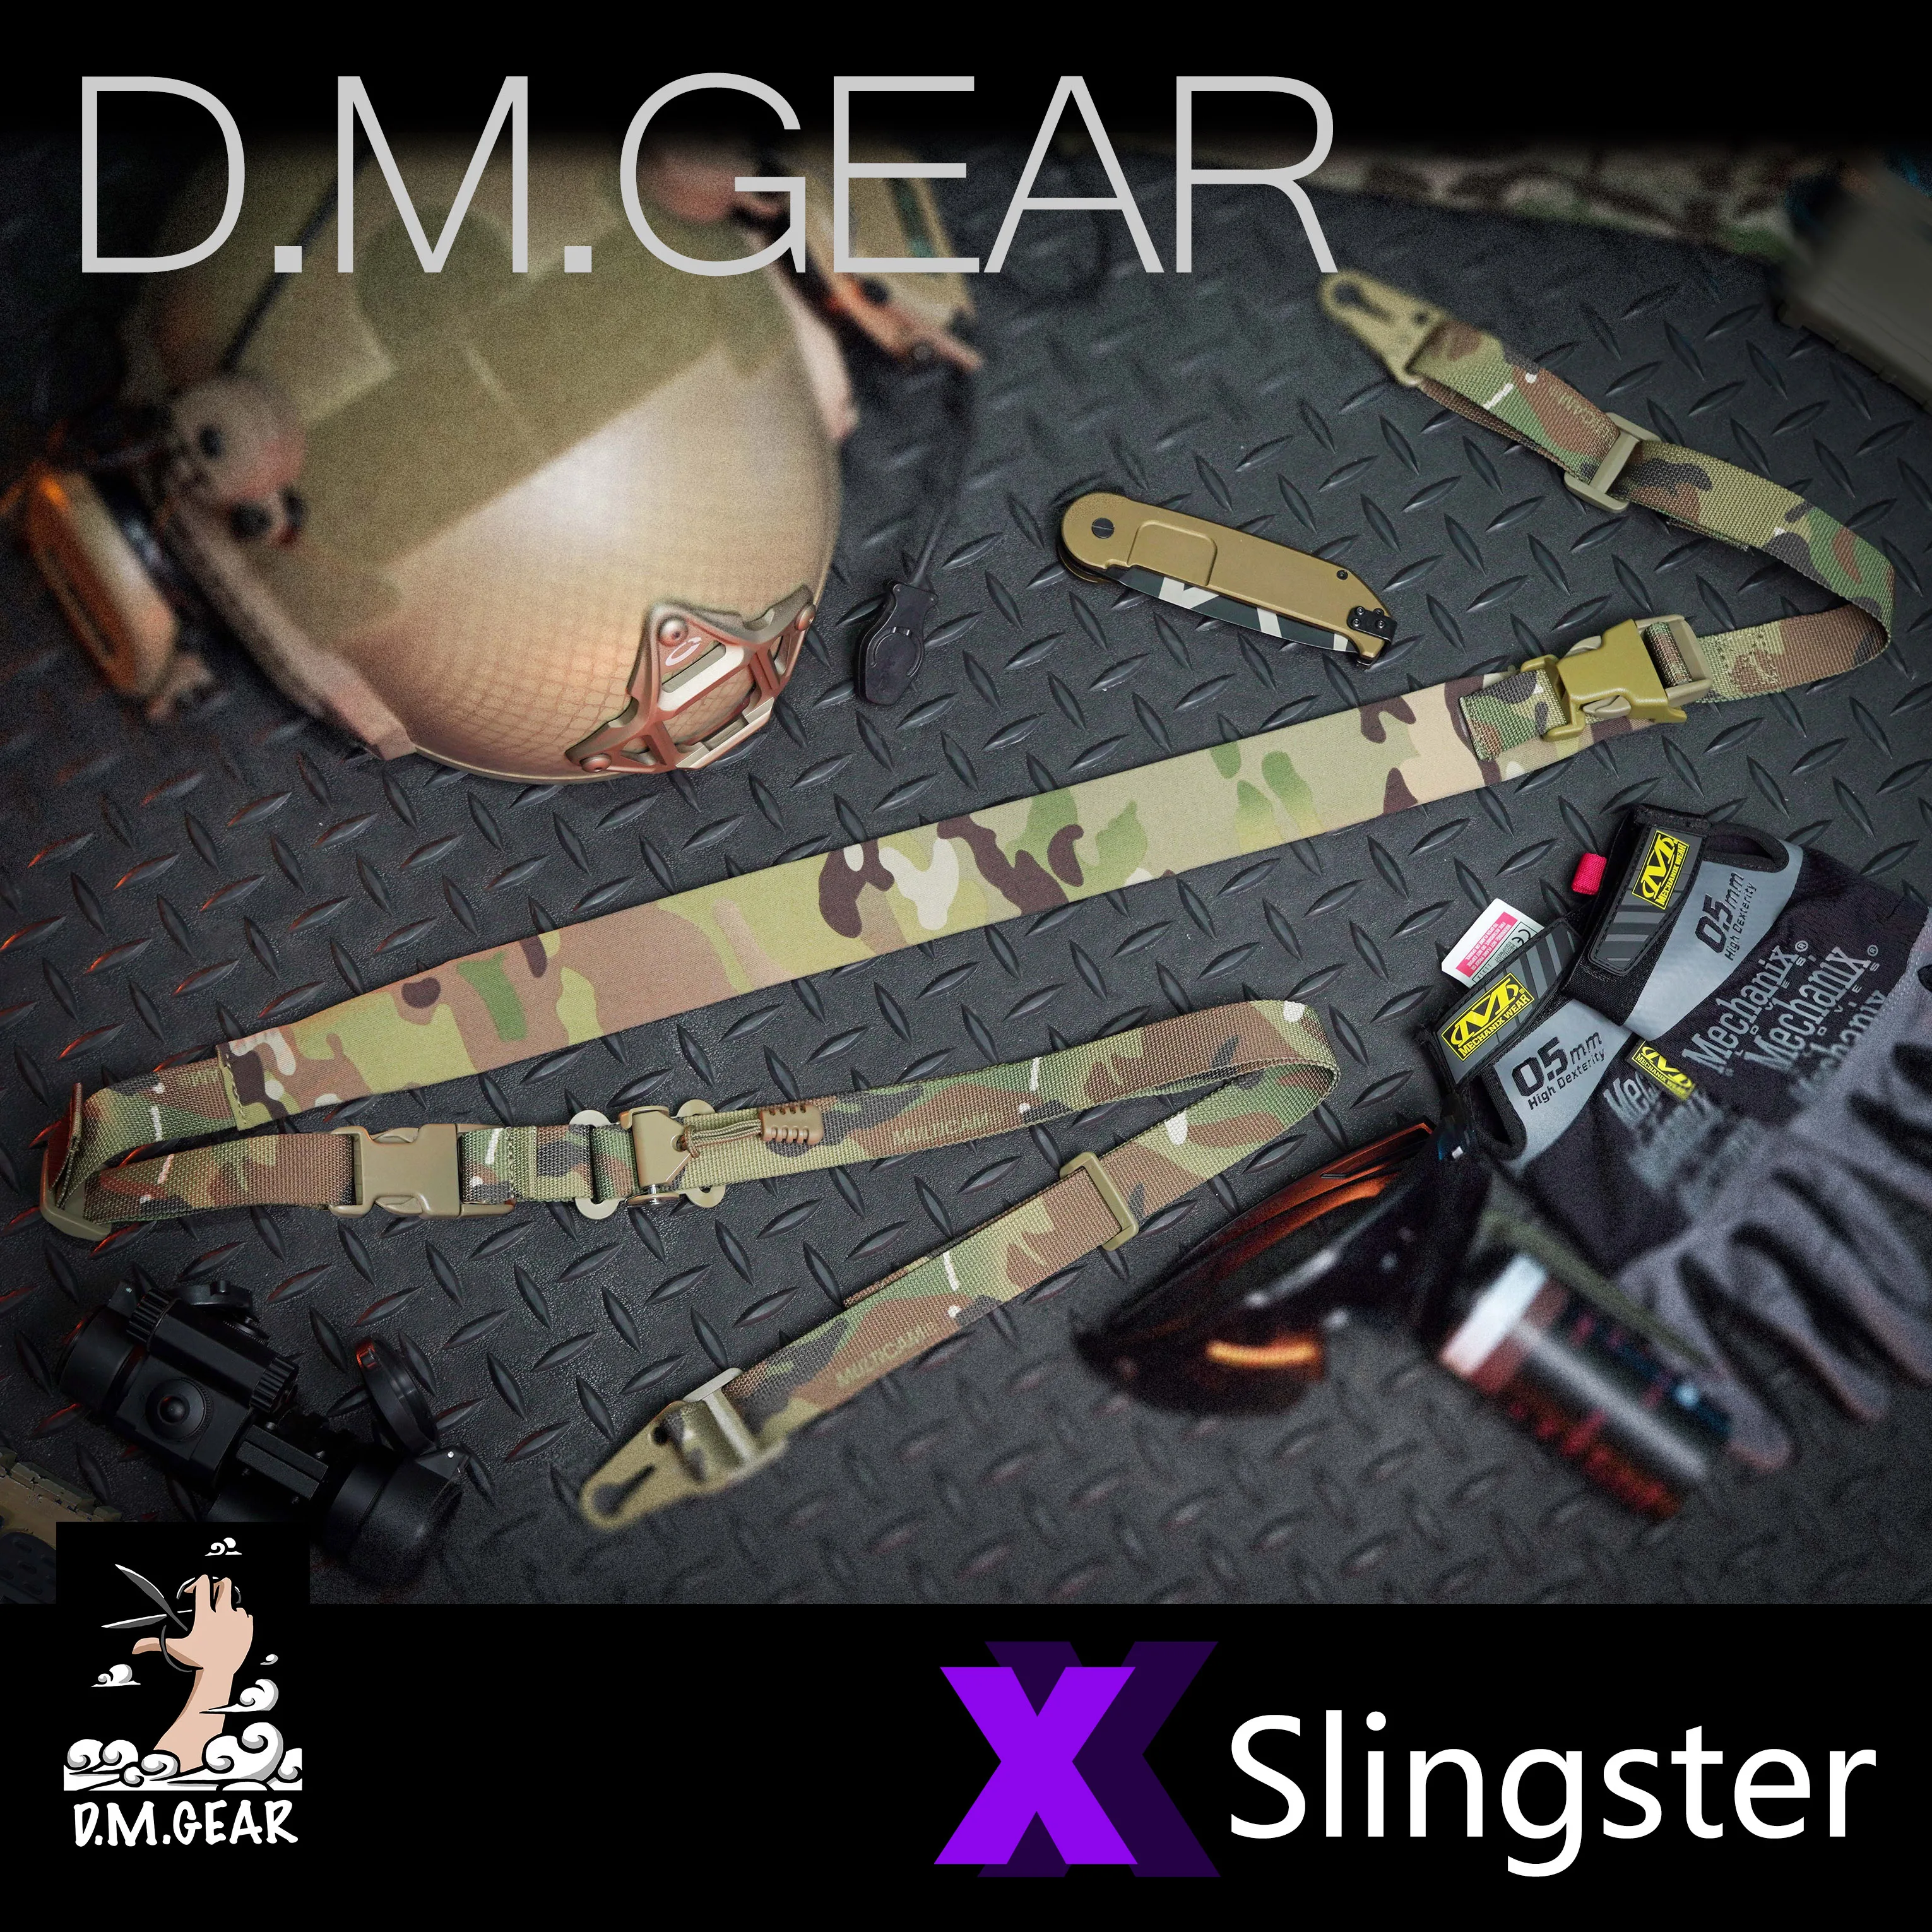 

Dmgear Airsoft X Slingster Mk2 Multicam Sling 2 Point Rifle Sling Hunting Gun Accessories Tactical Gear Military Equipment Army